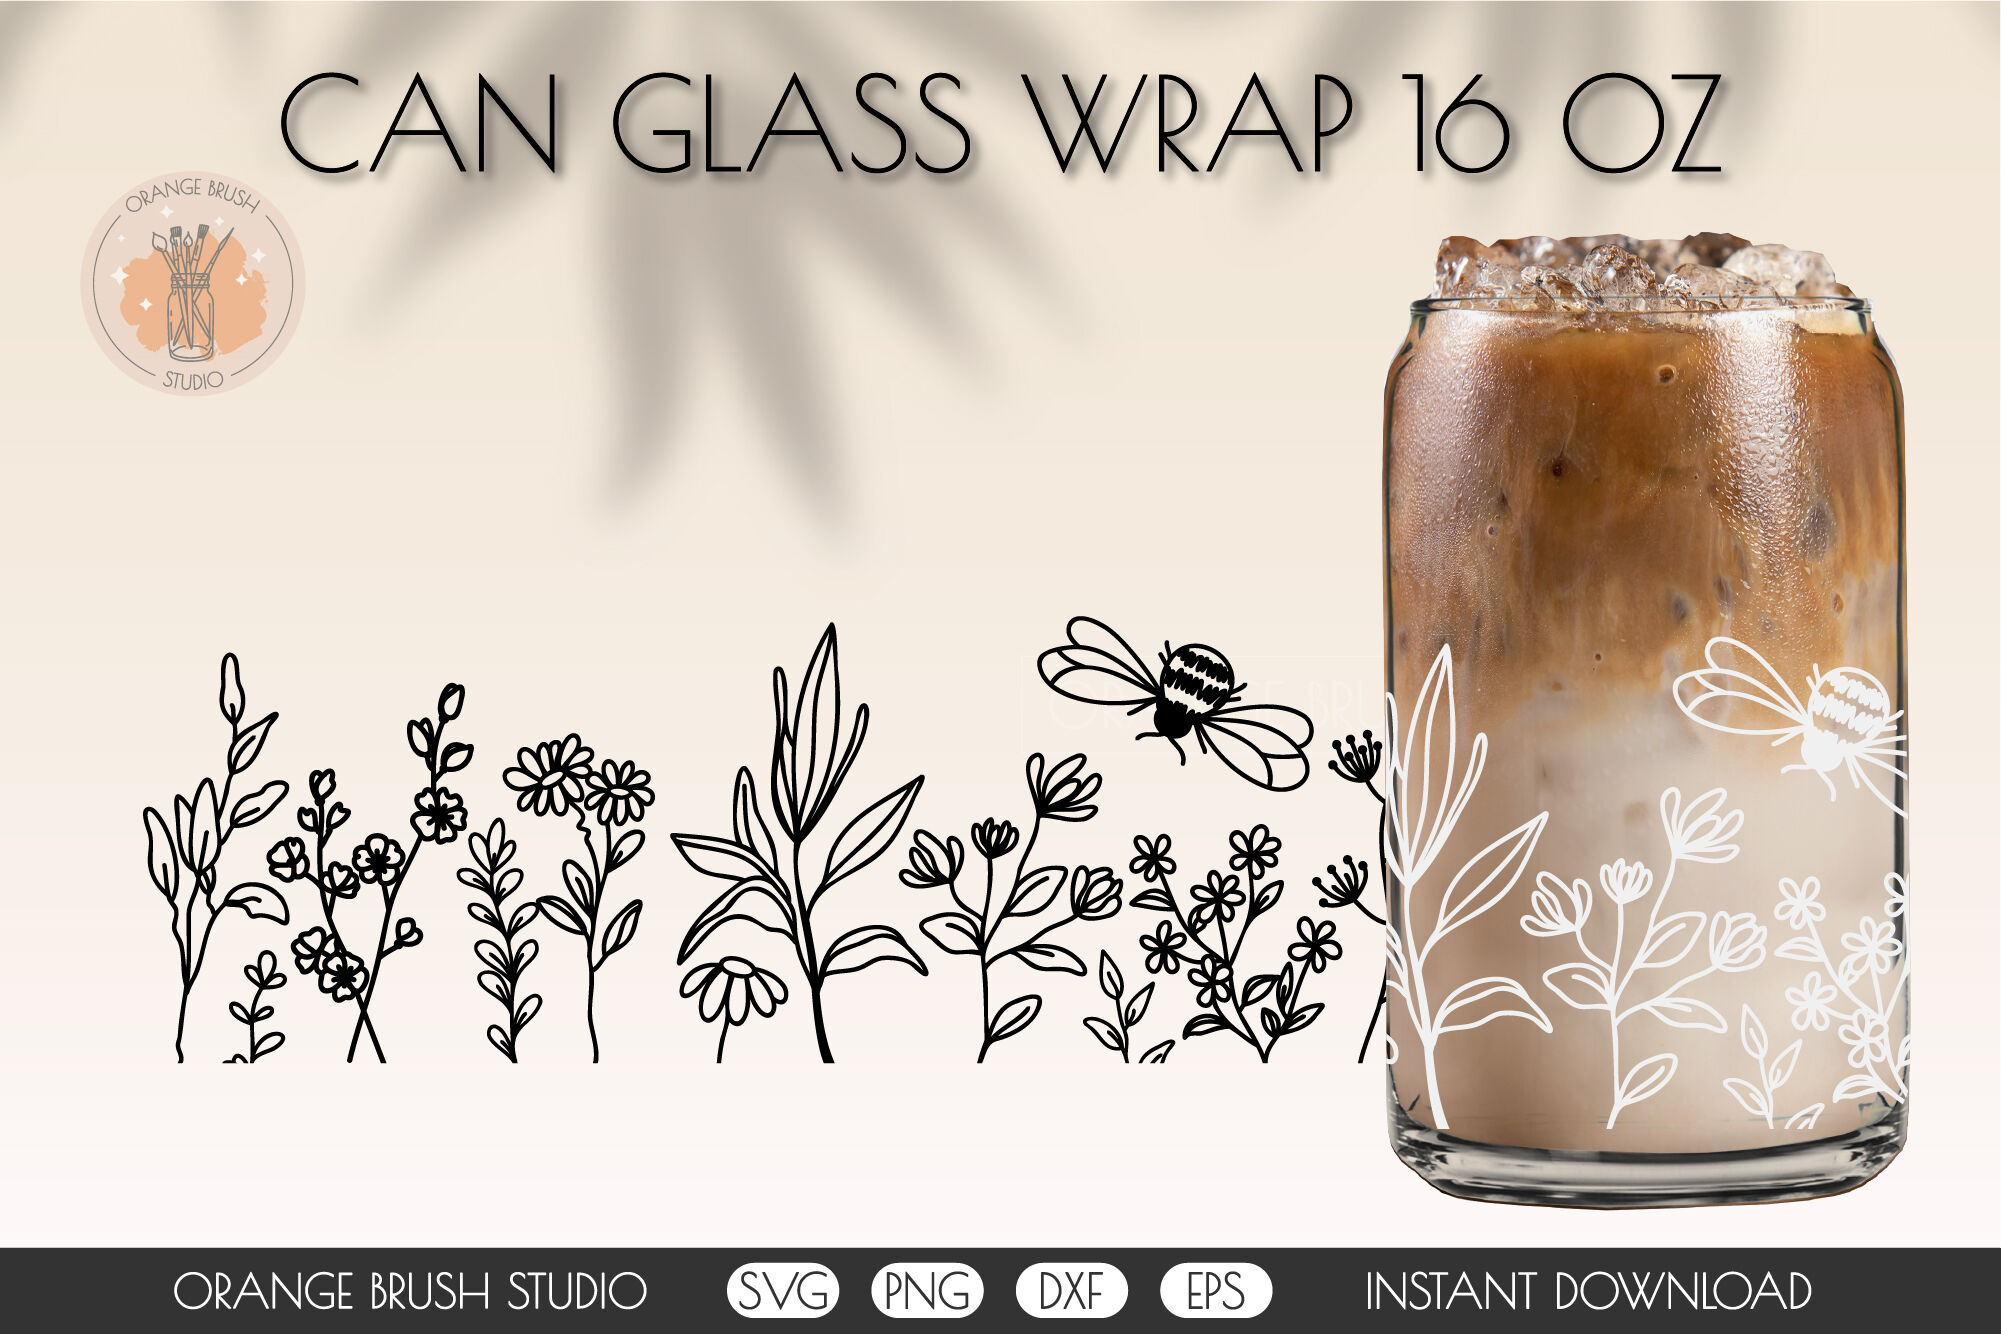 Magical 16oz libbey glass wrap, Celestial beer can glass svg - So